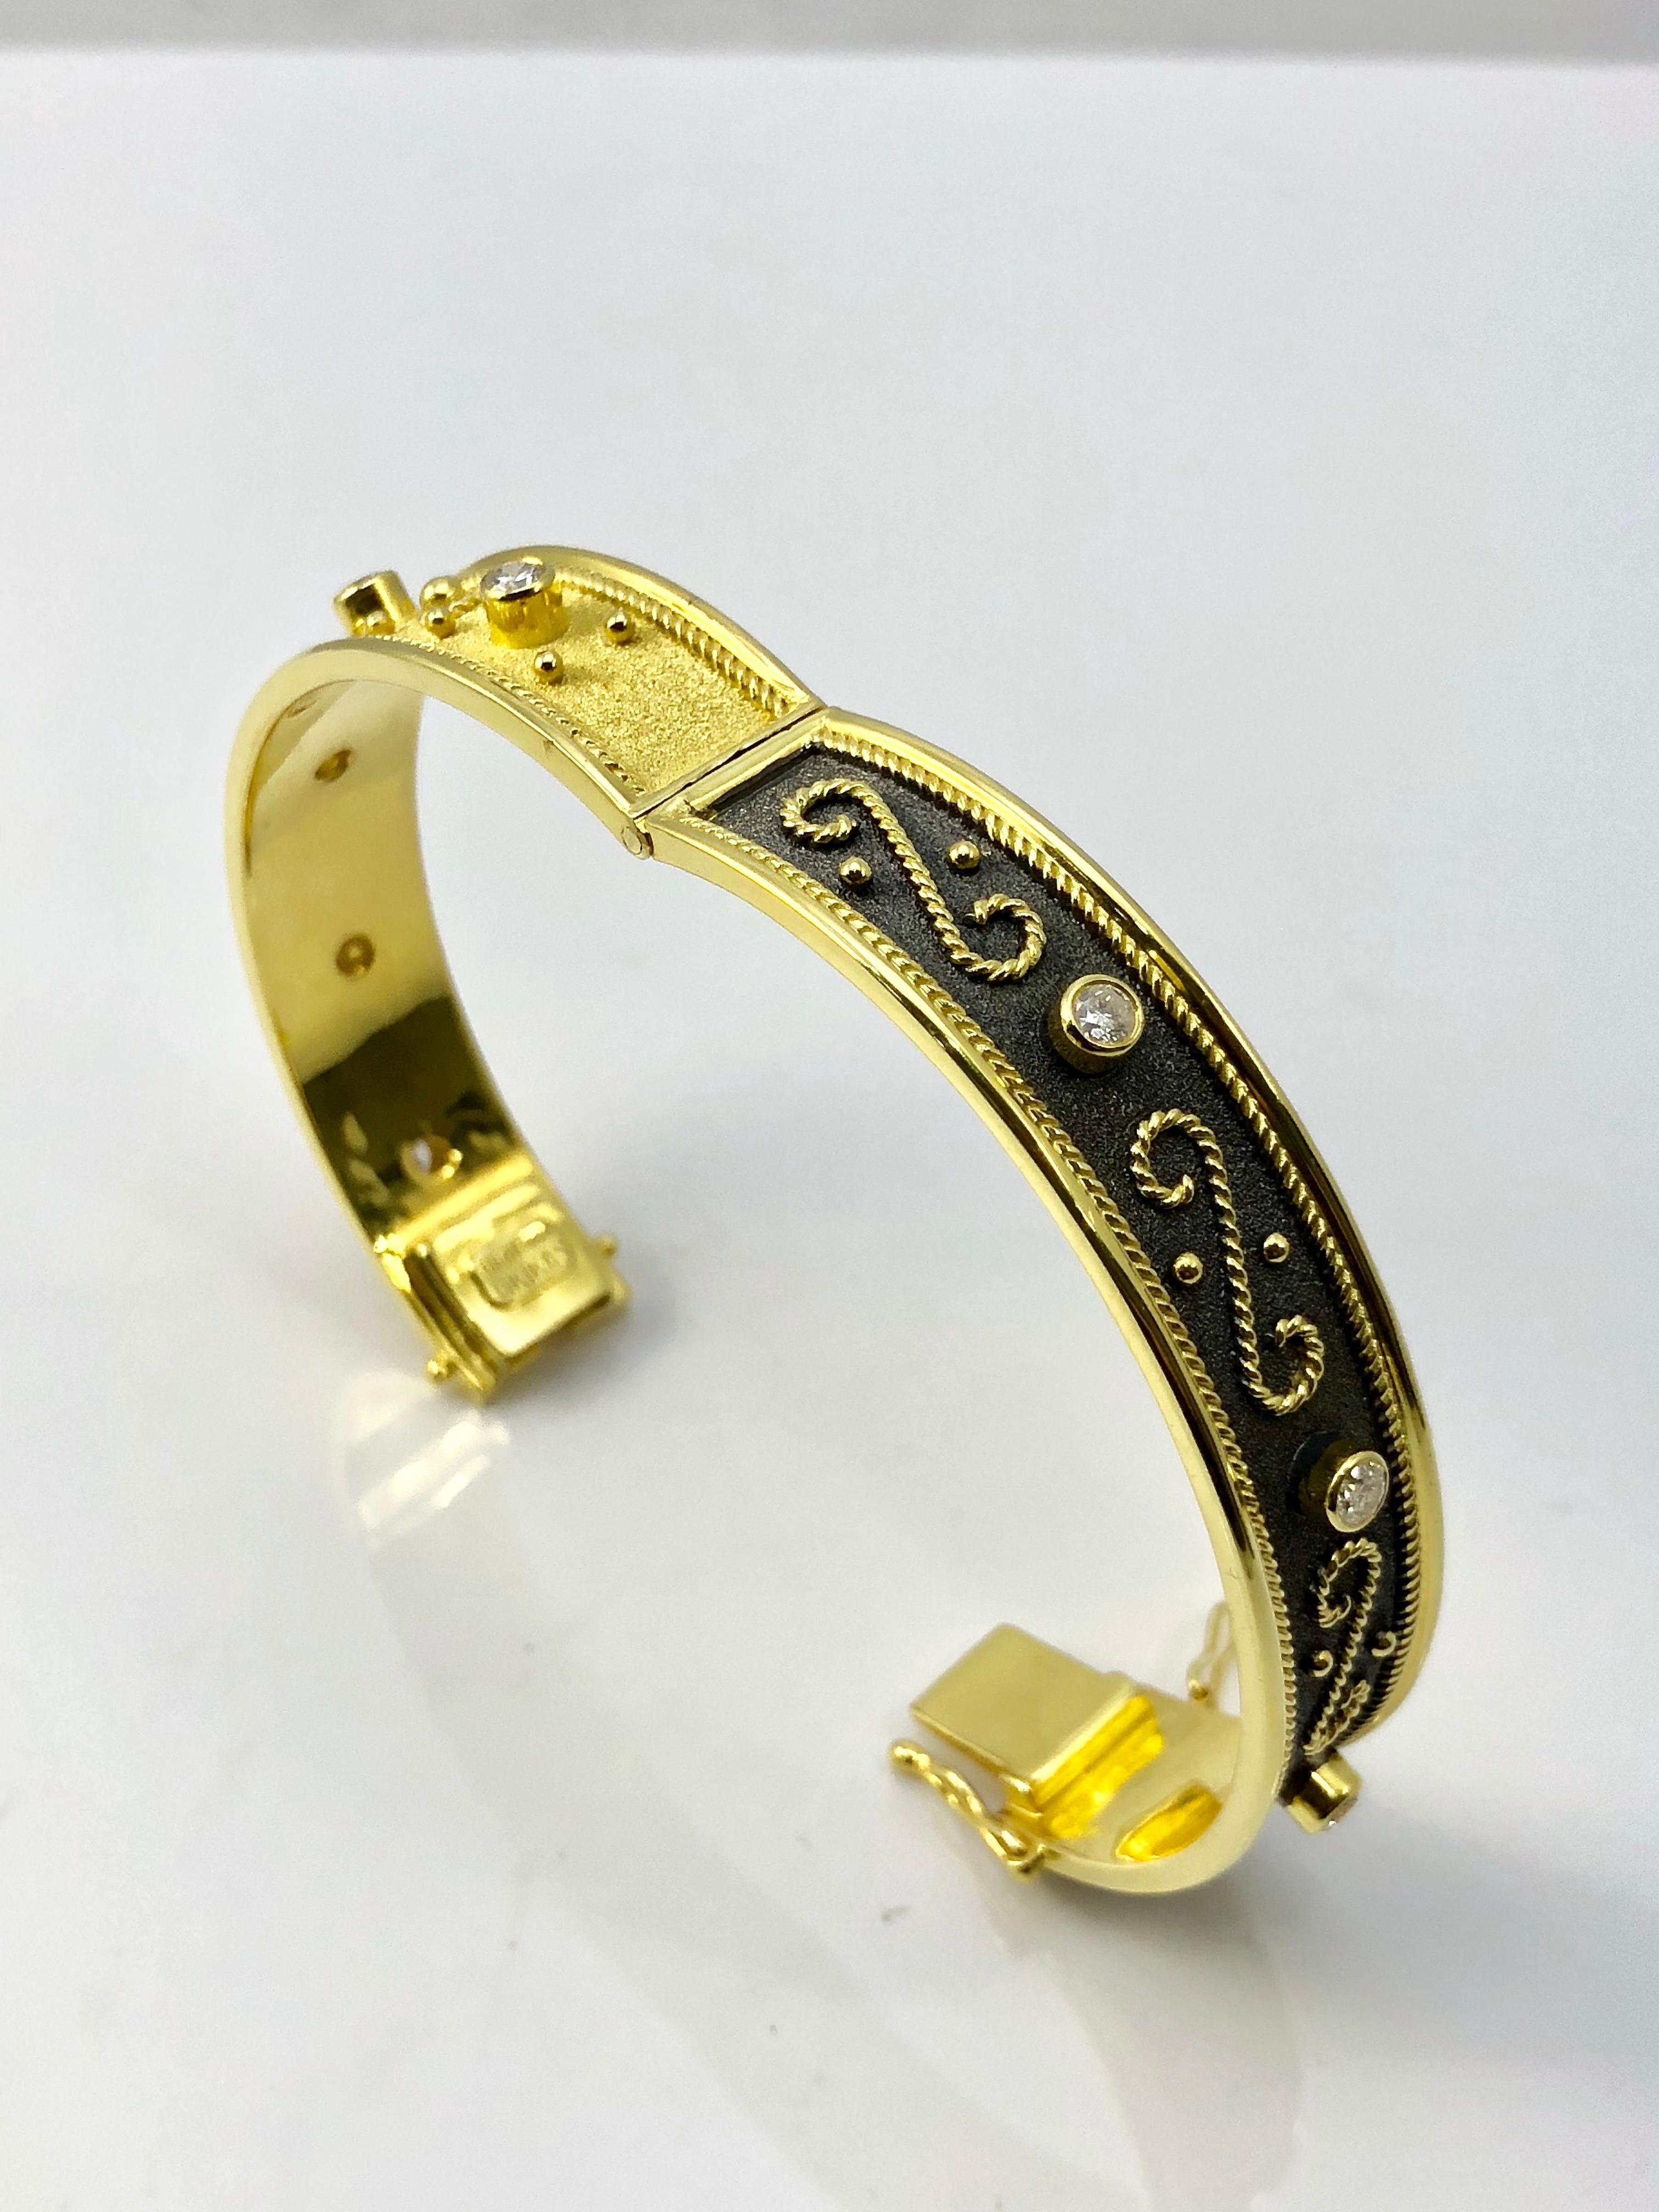 S.Georgios designer Bangle Bracelet Hand Made in 18 Karat Yellow Gold all custom-made. This gorgeous bracelet is microscopically decorated with granulation work in Byzantine style - and on one side has the  